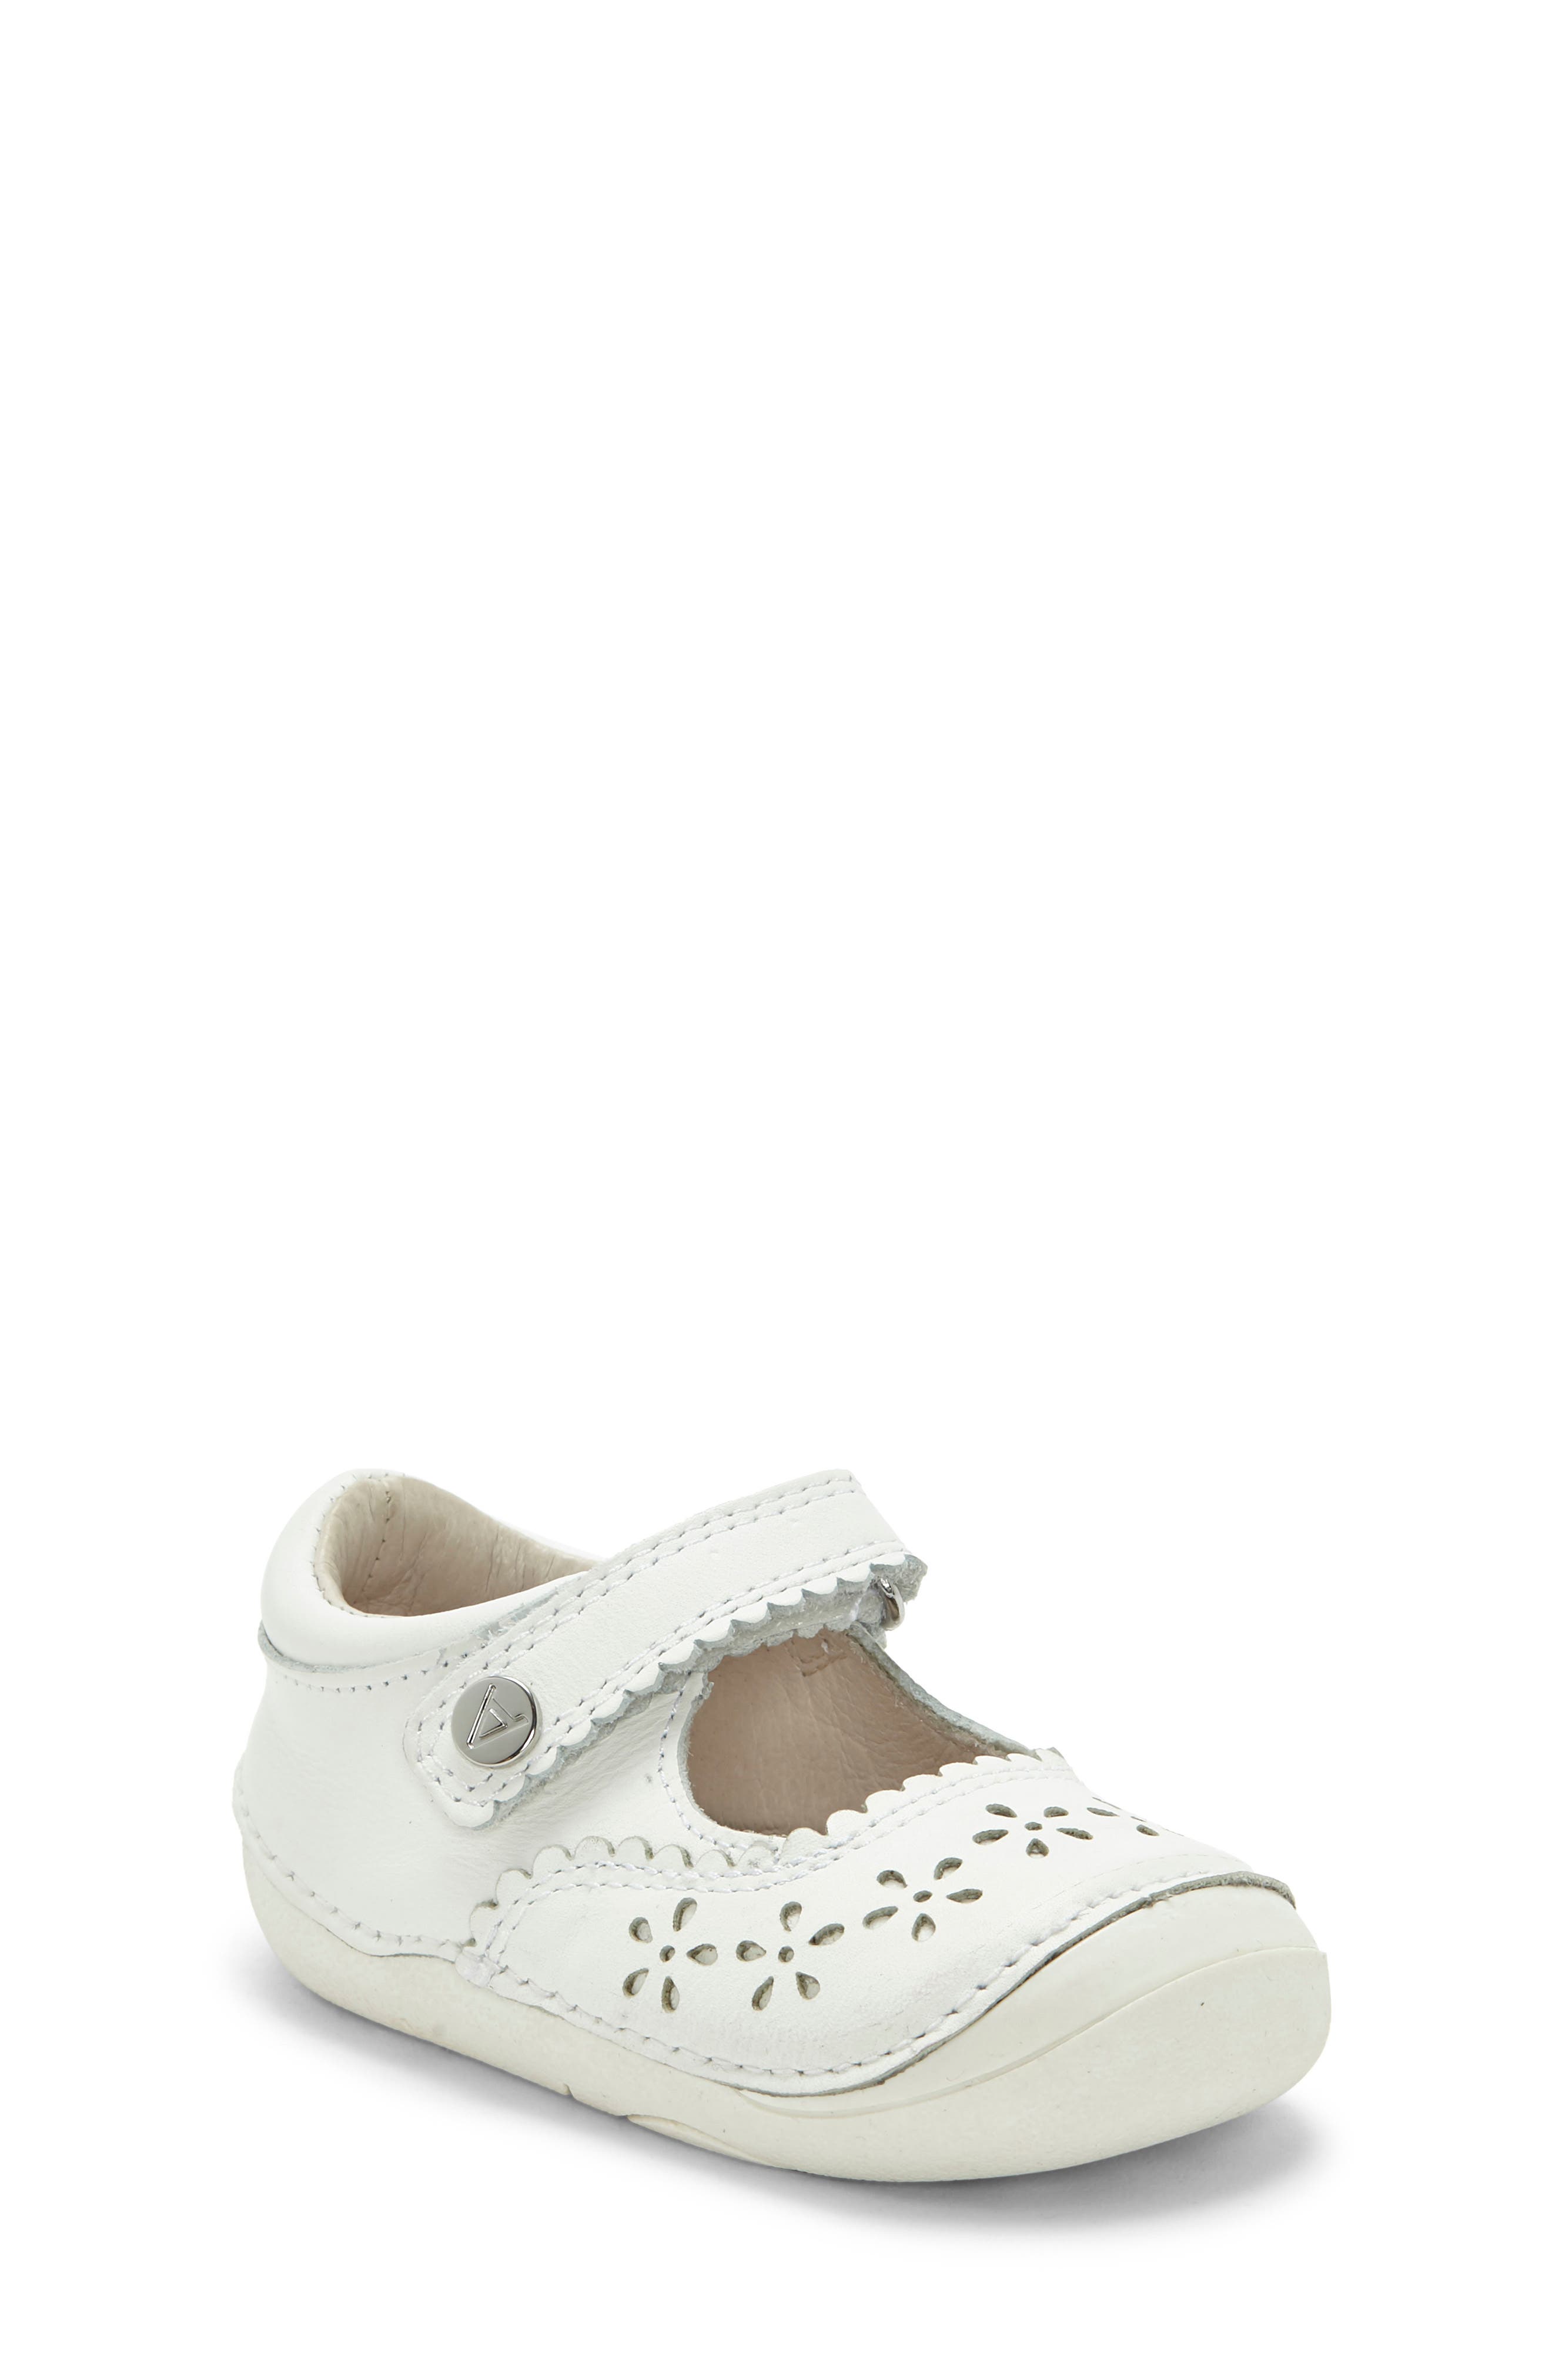 Kids' Sole Play Shoes | Nordstrom